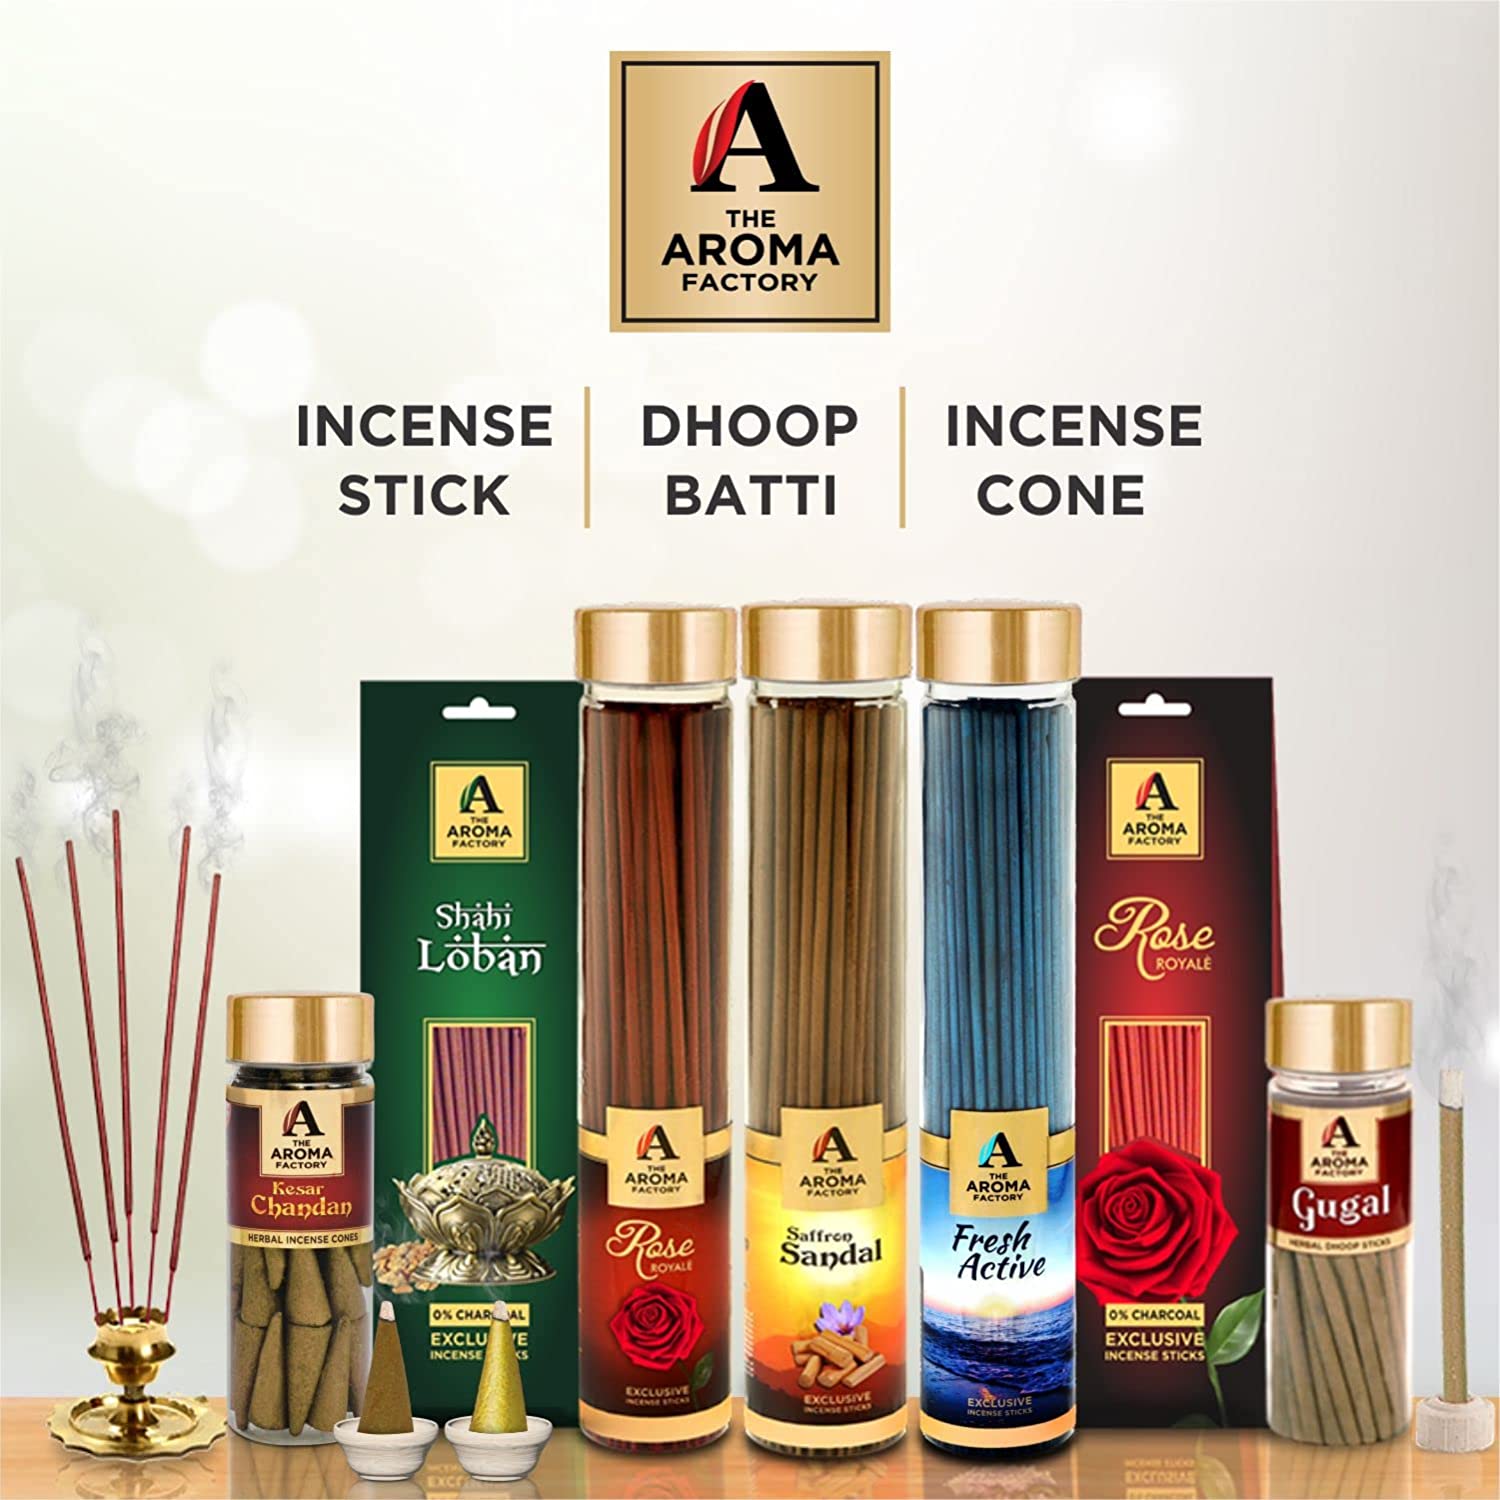 The Aroma Factory Incense Dhoop Cone for Pooja, Green Apple (100% Herbal & 0% Charcoal) 1 Bottle x 30 Cones